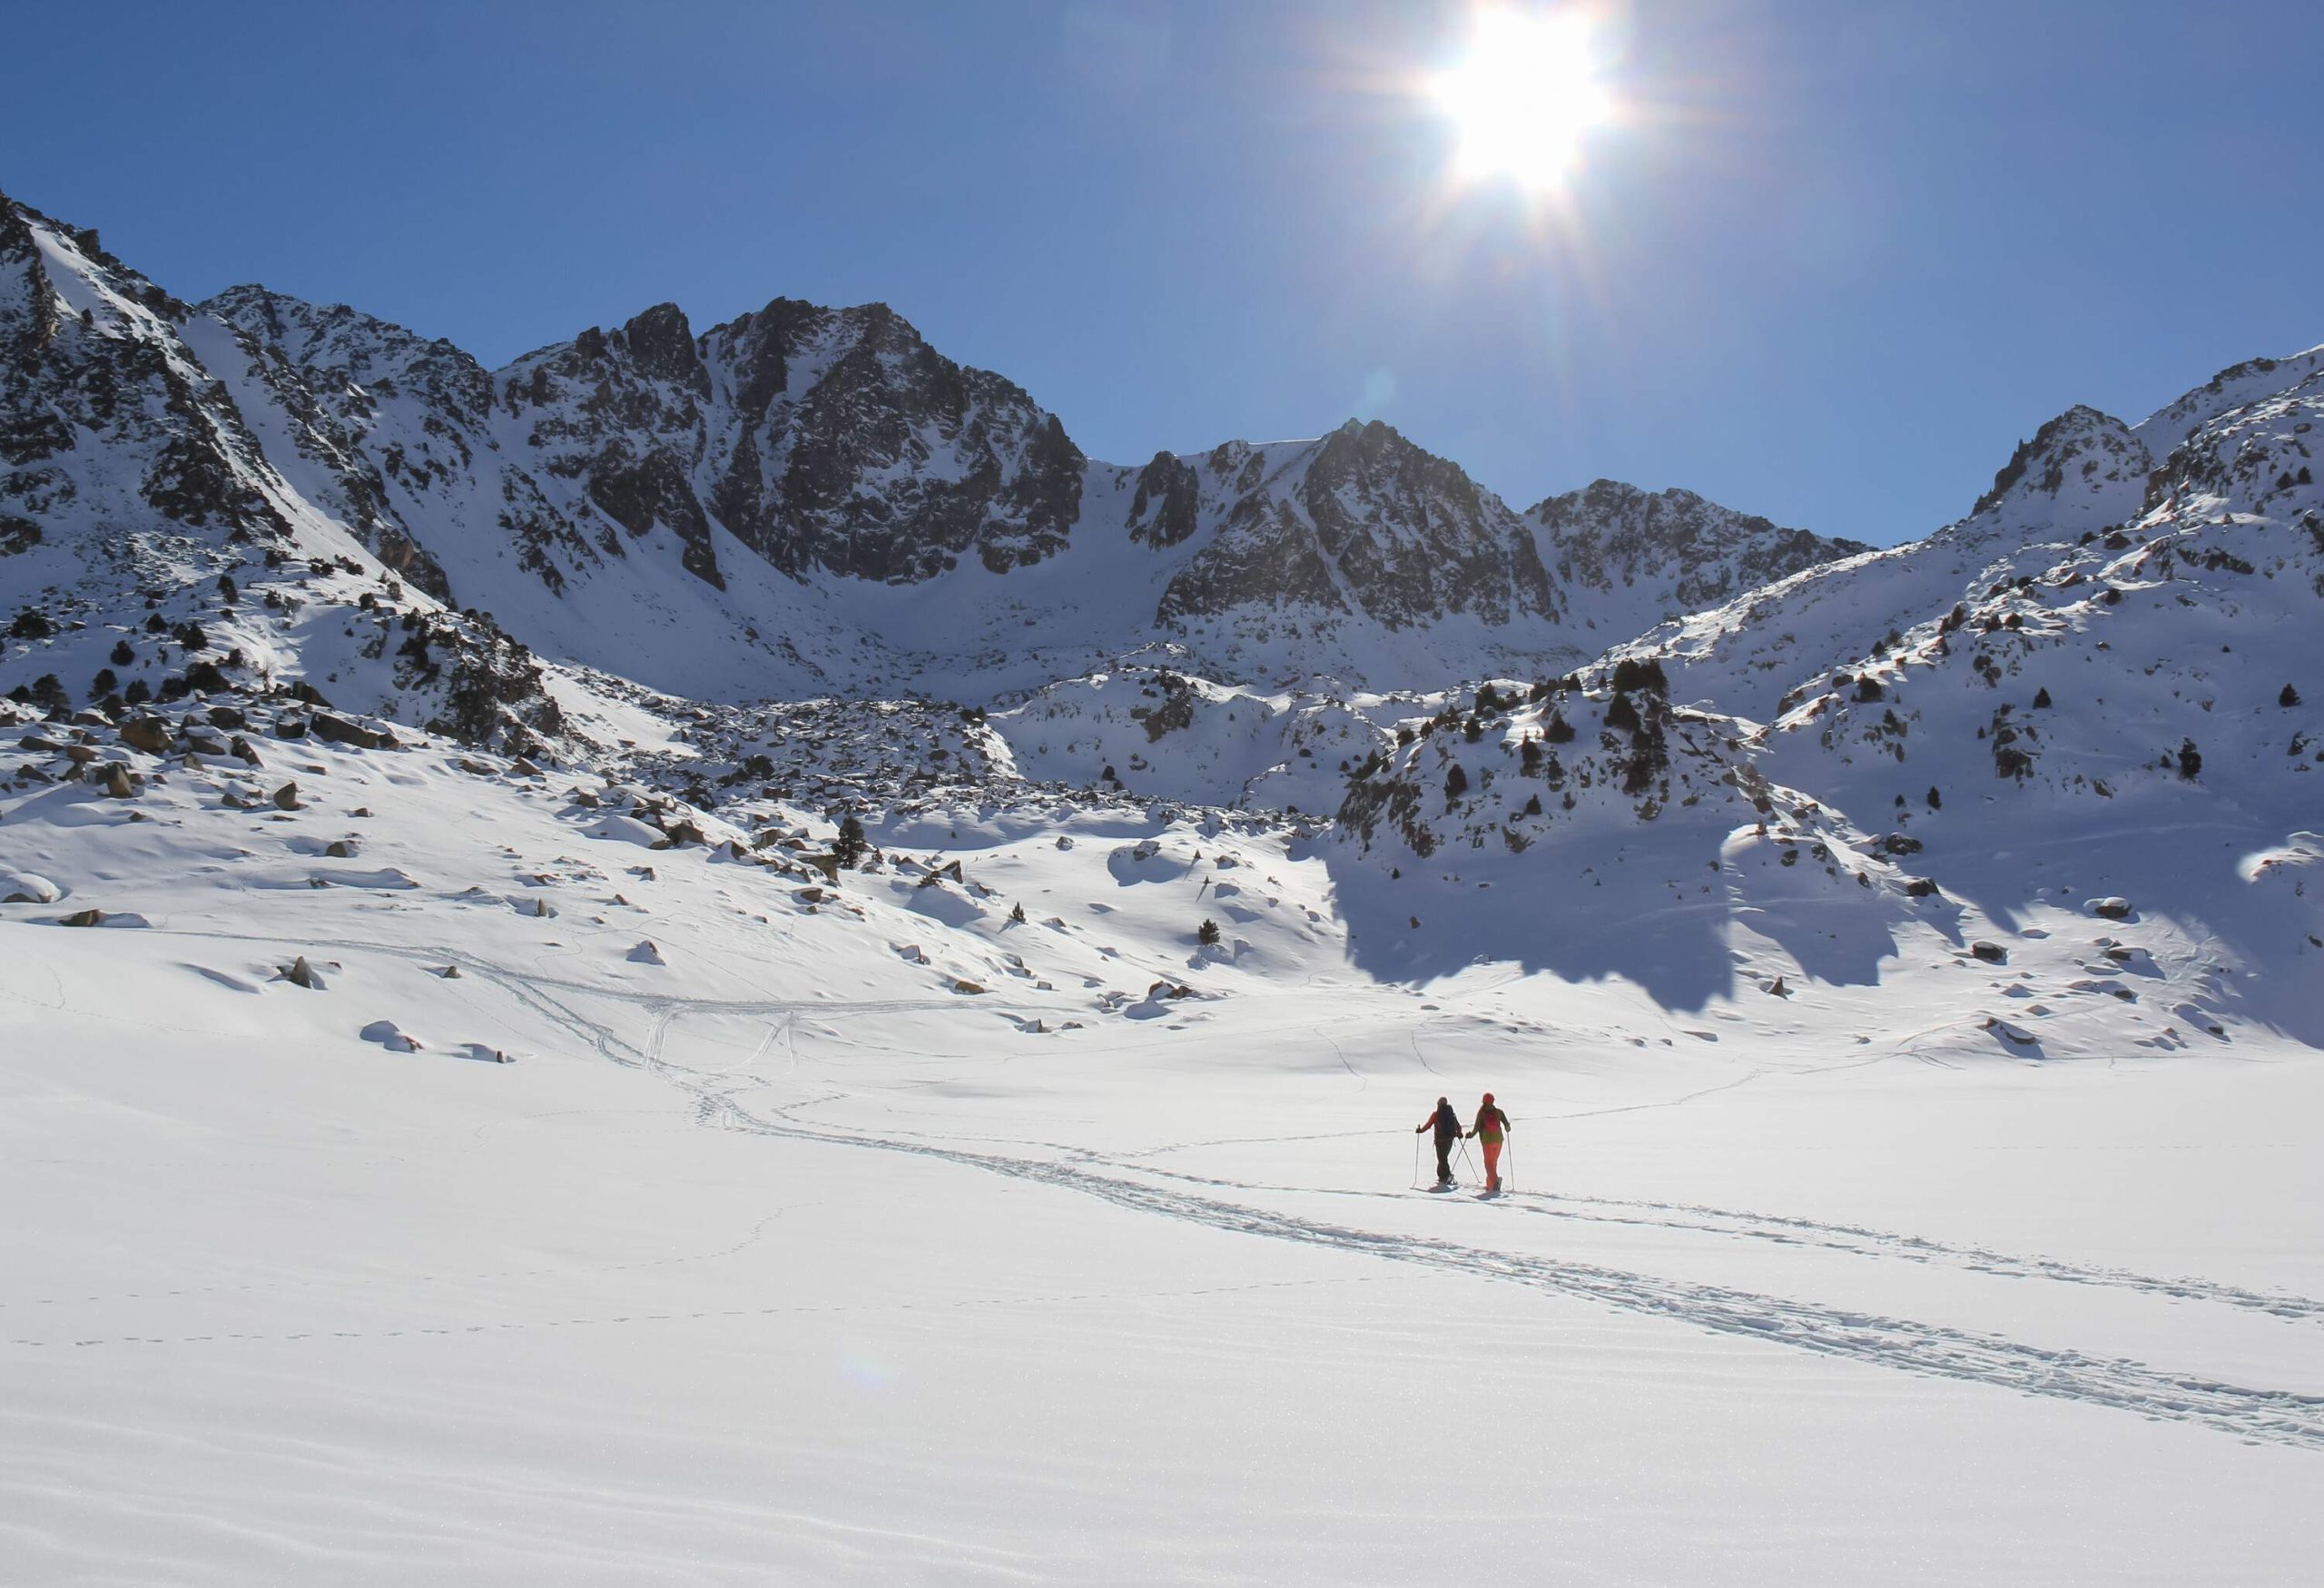 Two skiers walk through powder snow land beneath the mountains covered in deep snow.